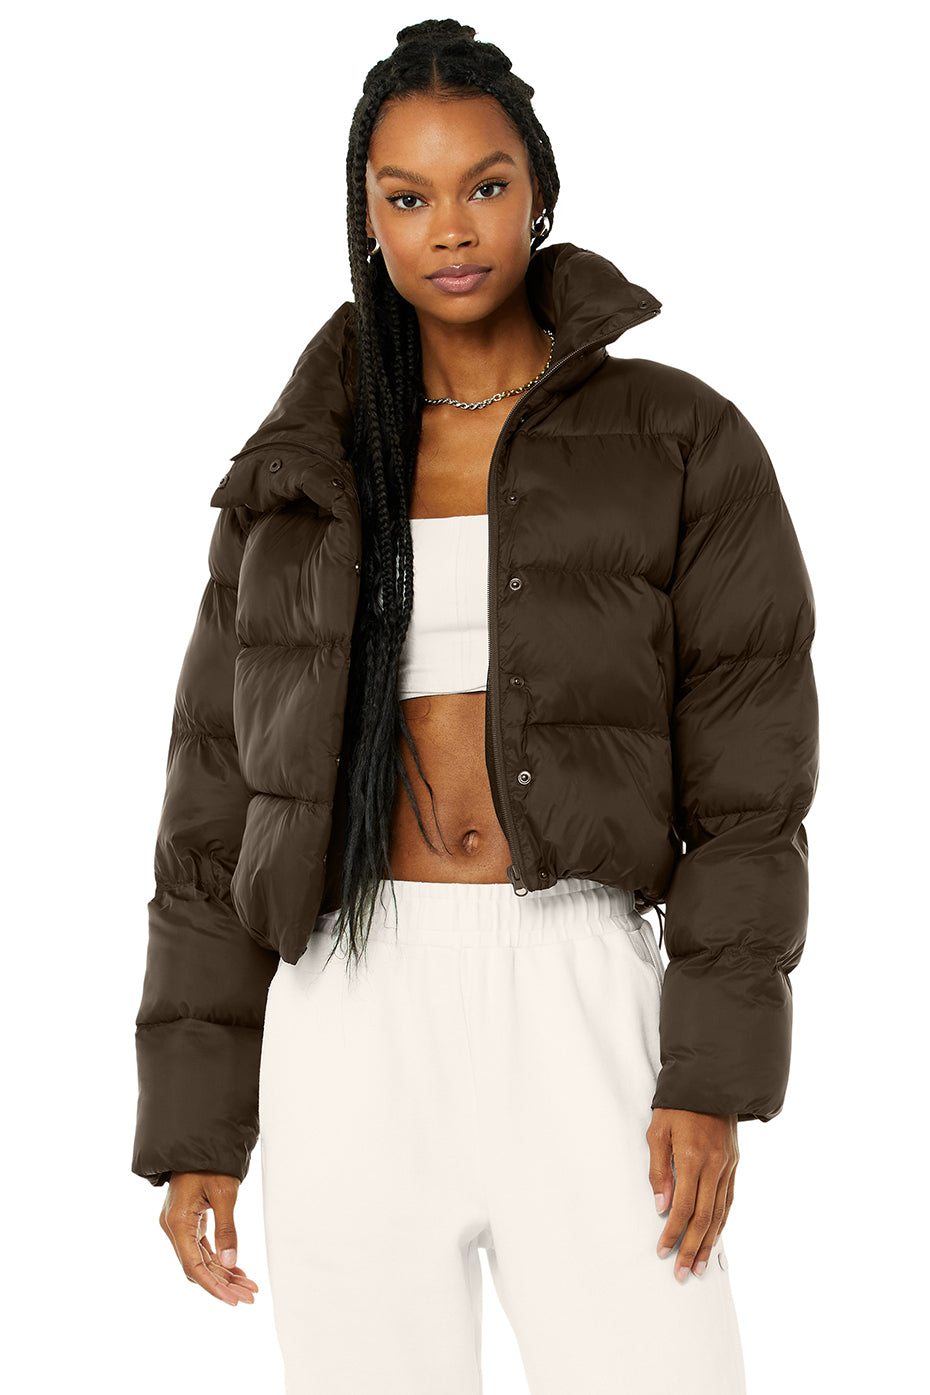 Gold Rush Puffer - Espresso  Alo yoga, Puffer jacket outfit